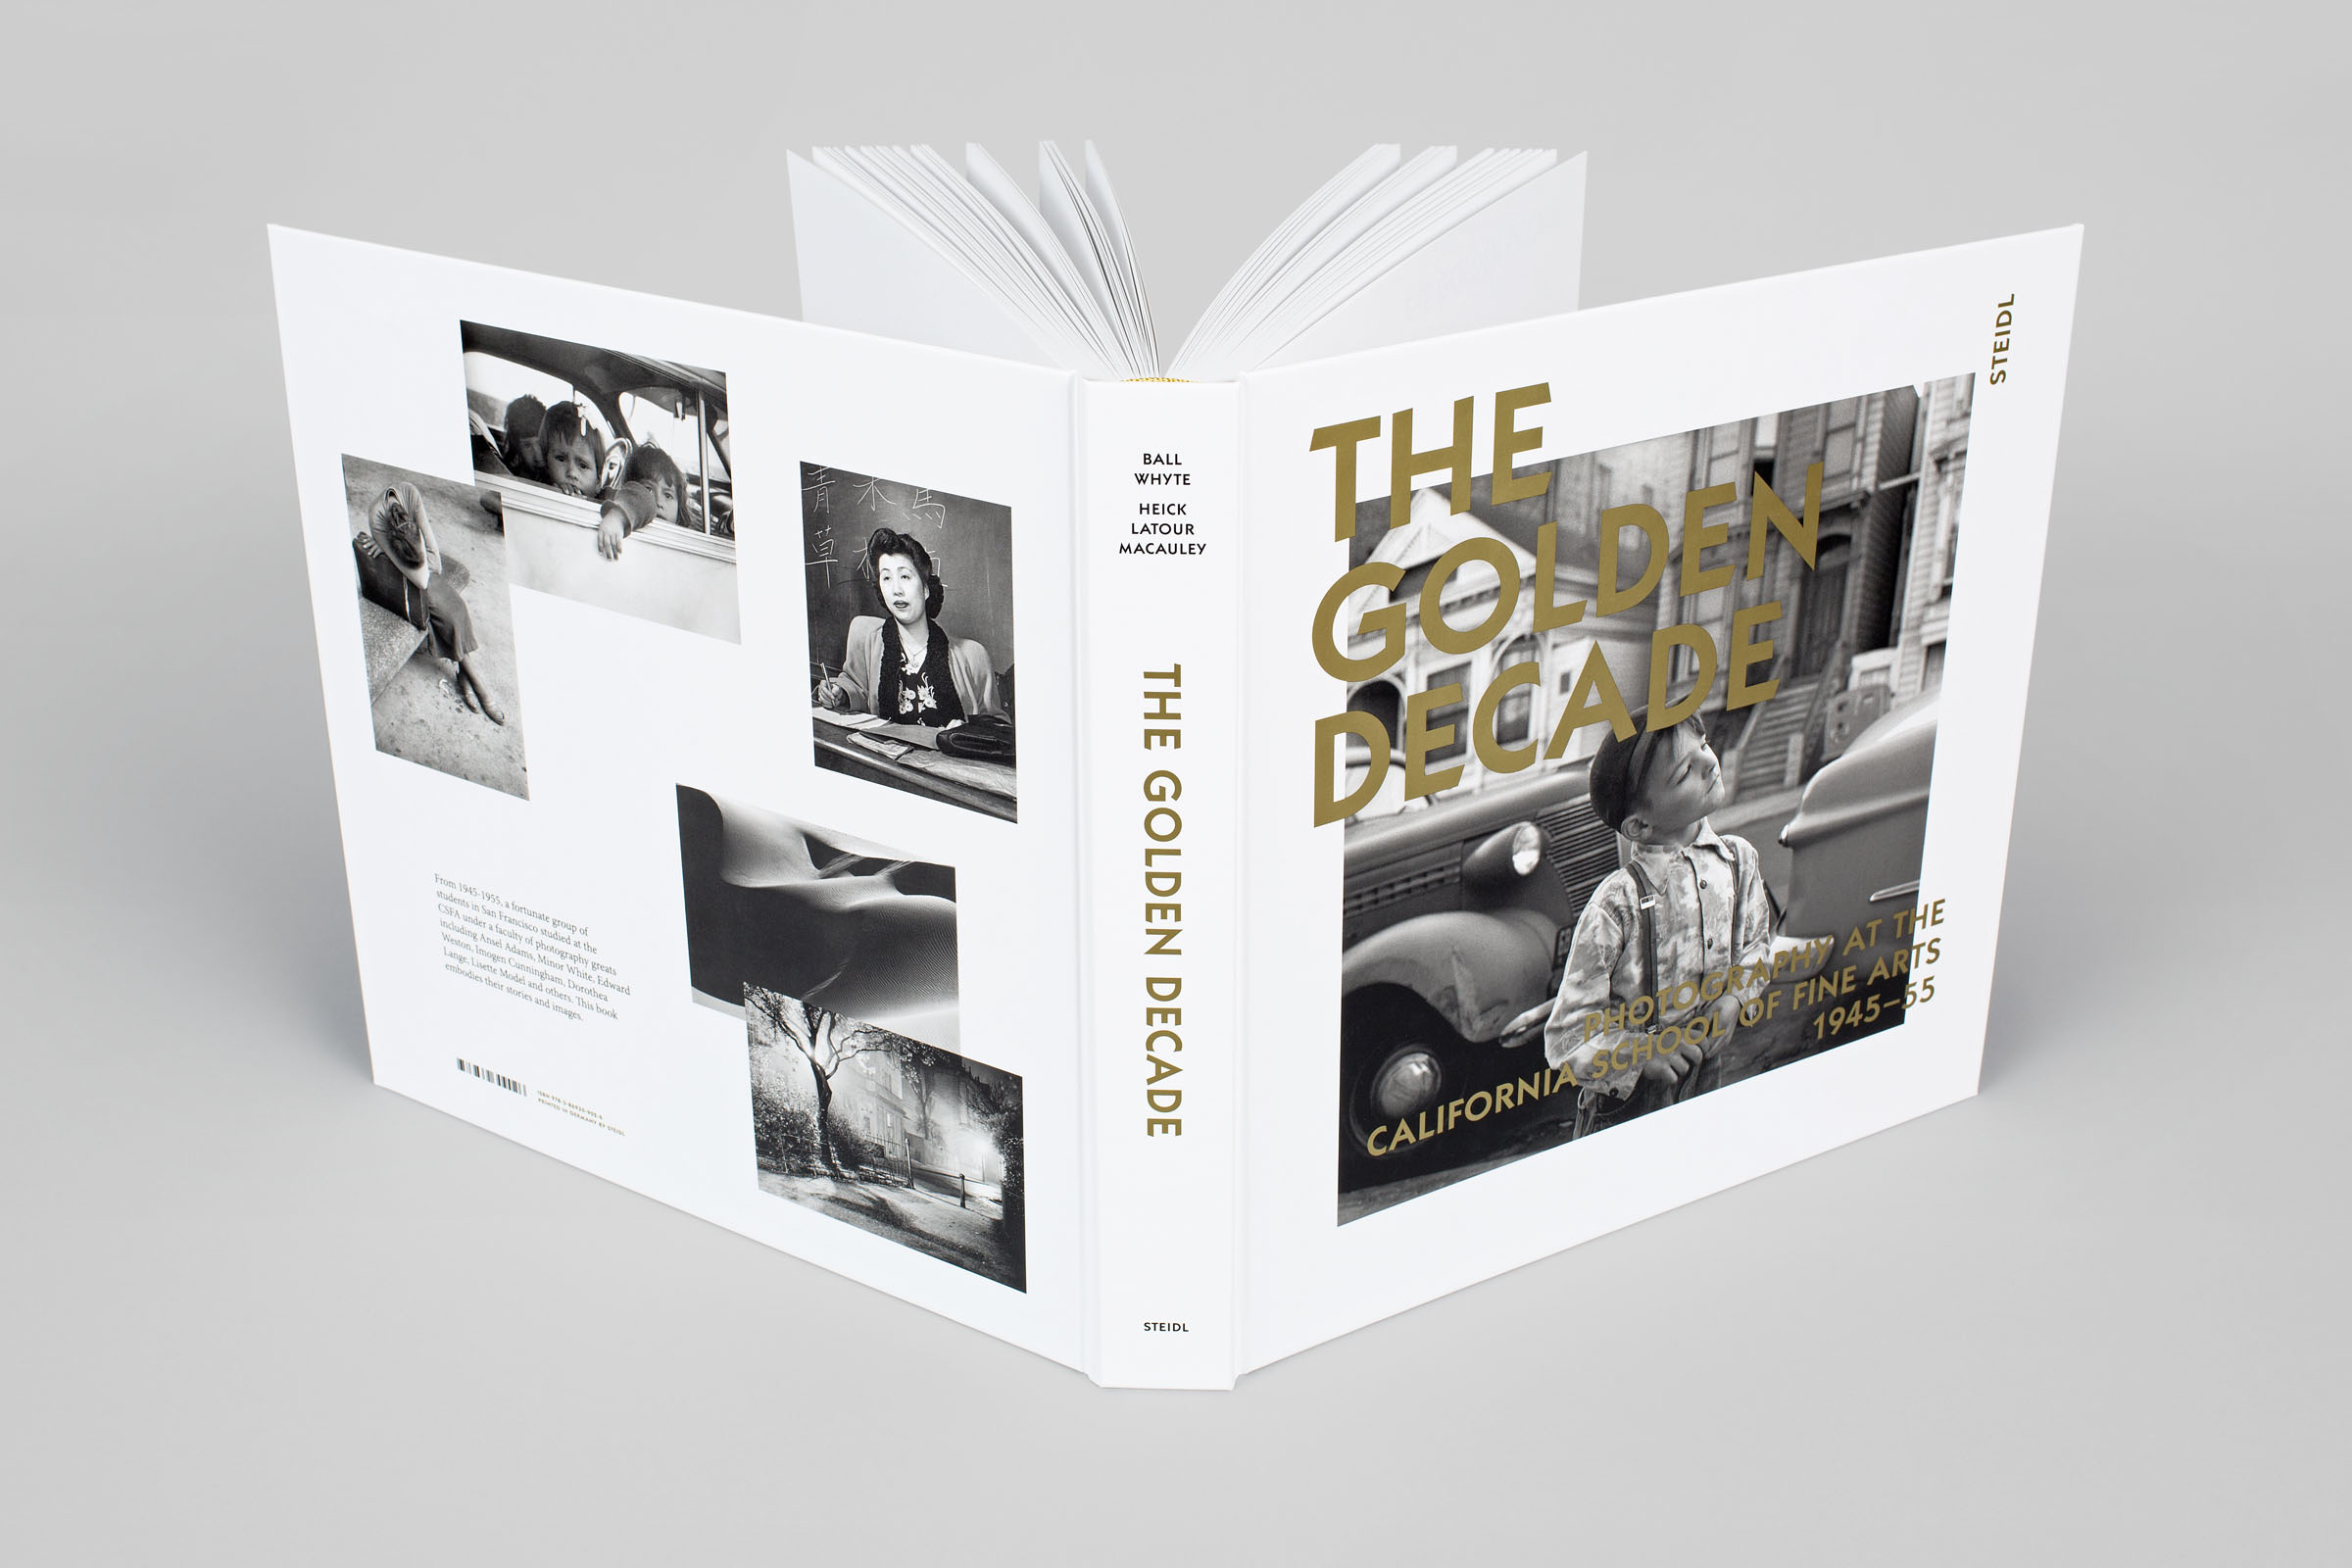 The Golden Decade, published by Steidl, 2016